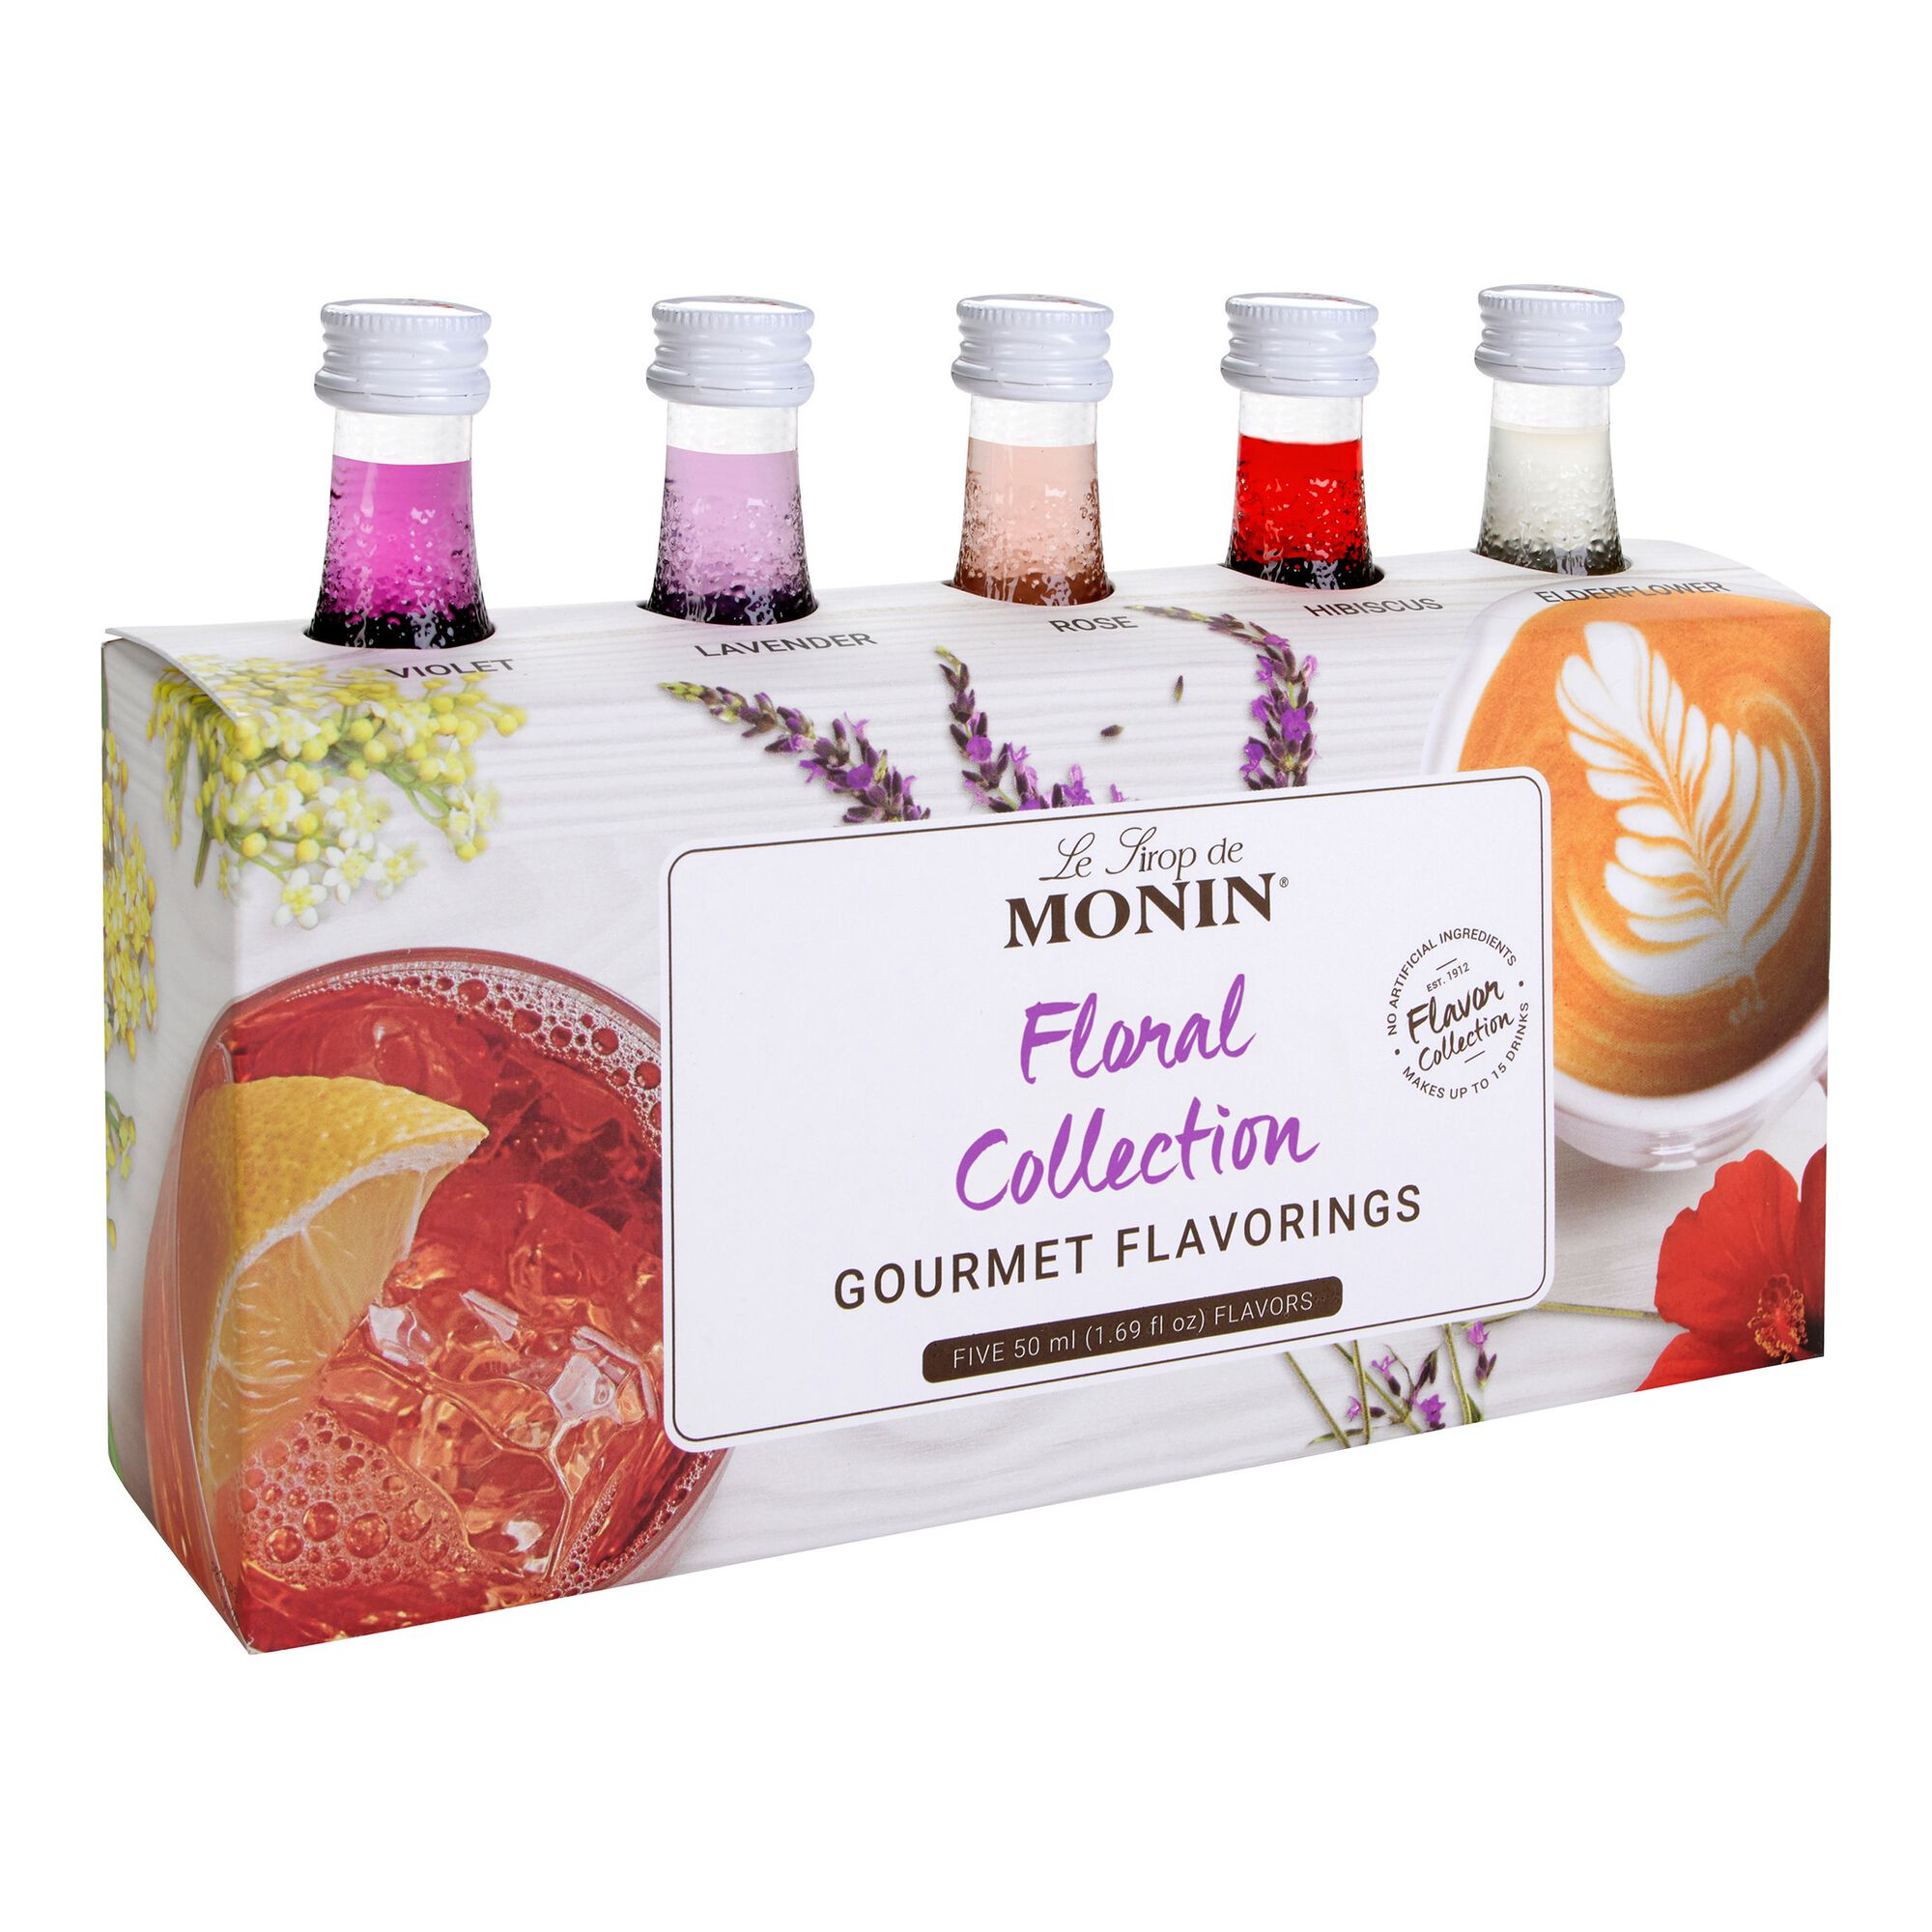 Monin Mini Floral Syrup Collection 5 Pack - World Market